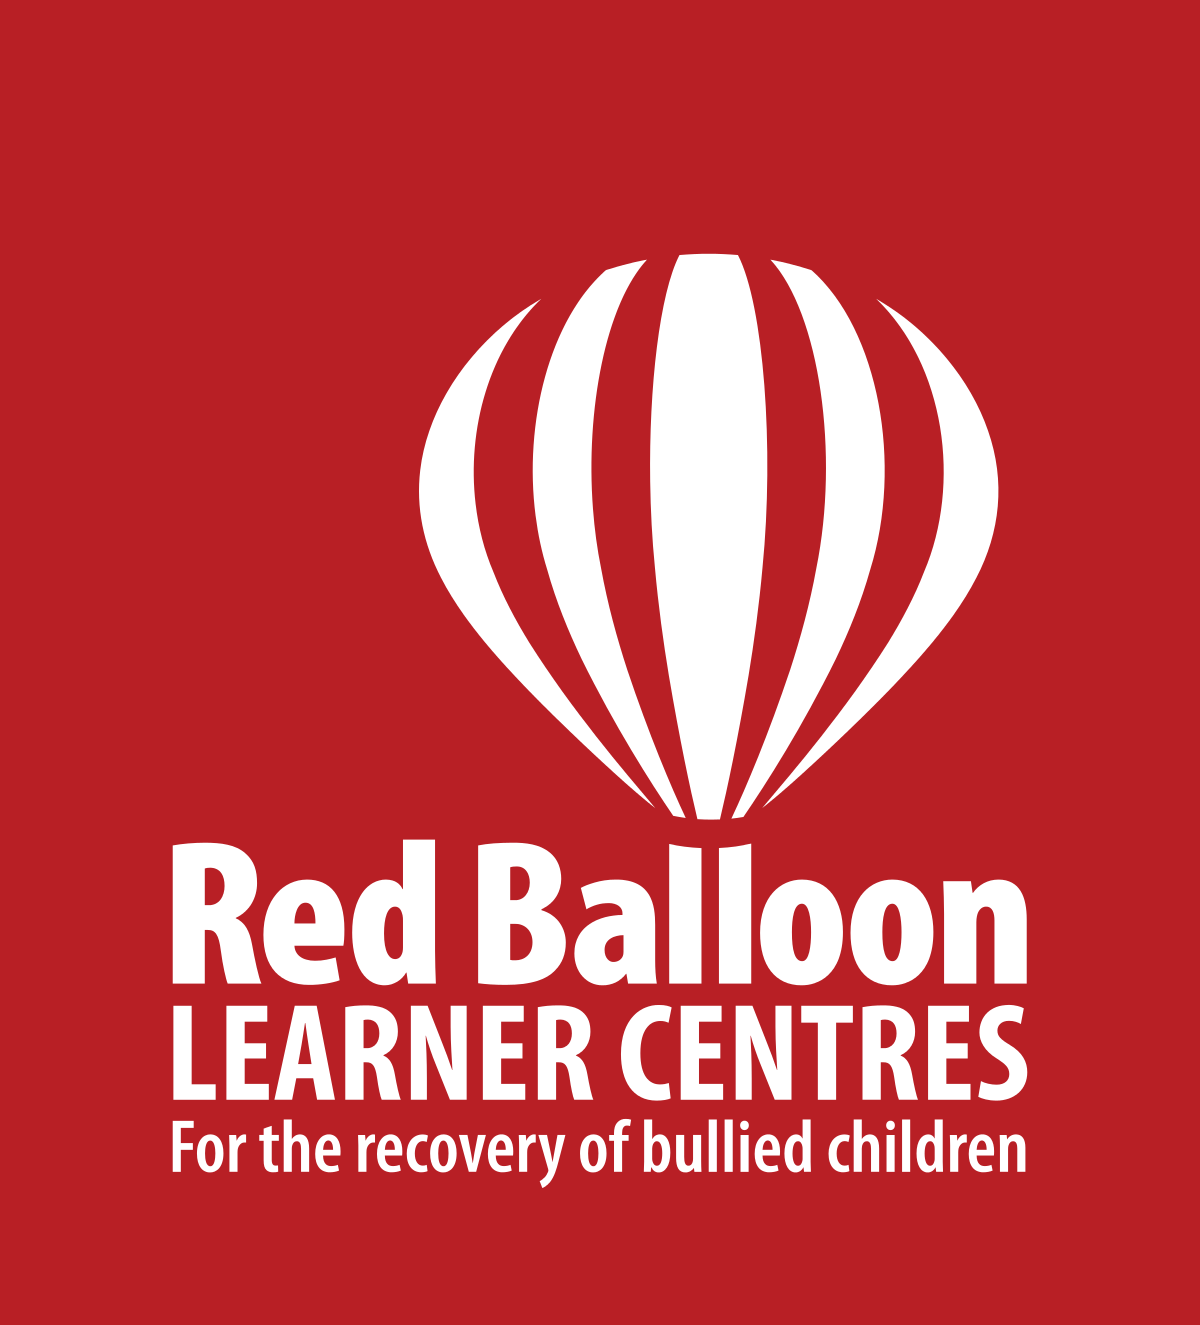 Red Balloon Logo - The Red Balloon Learner Centres